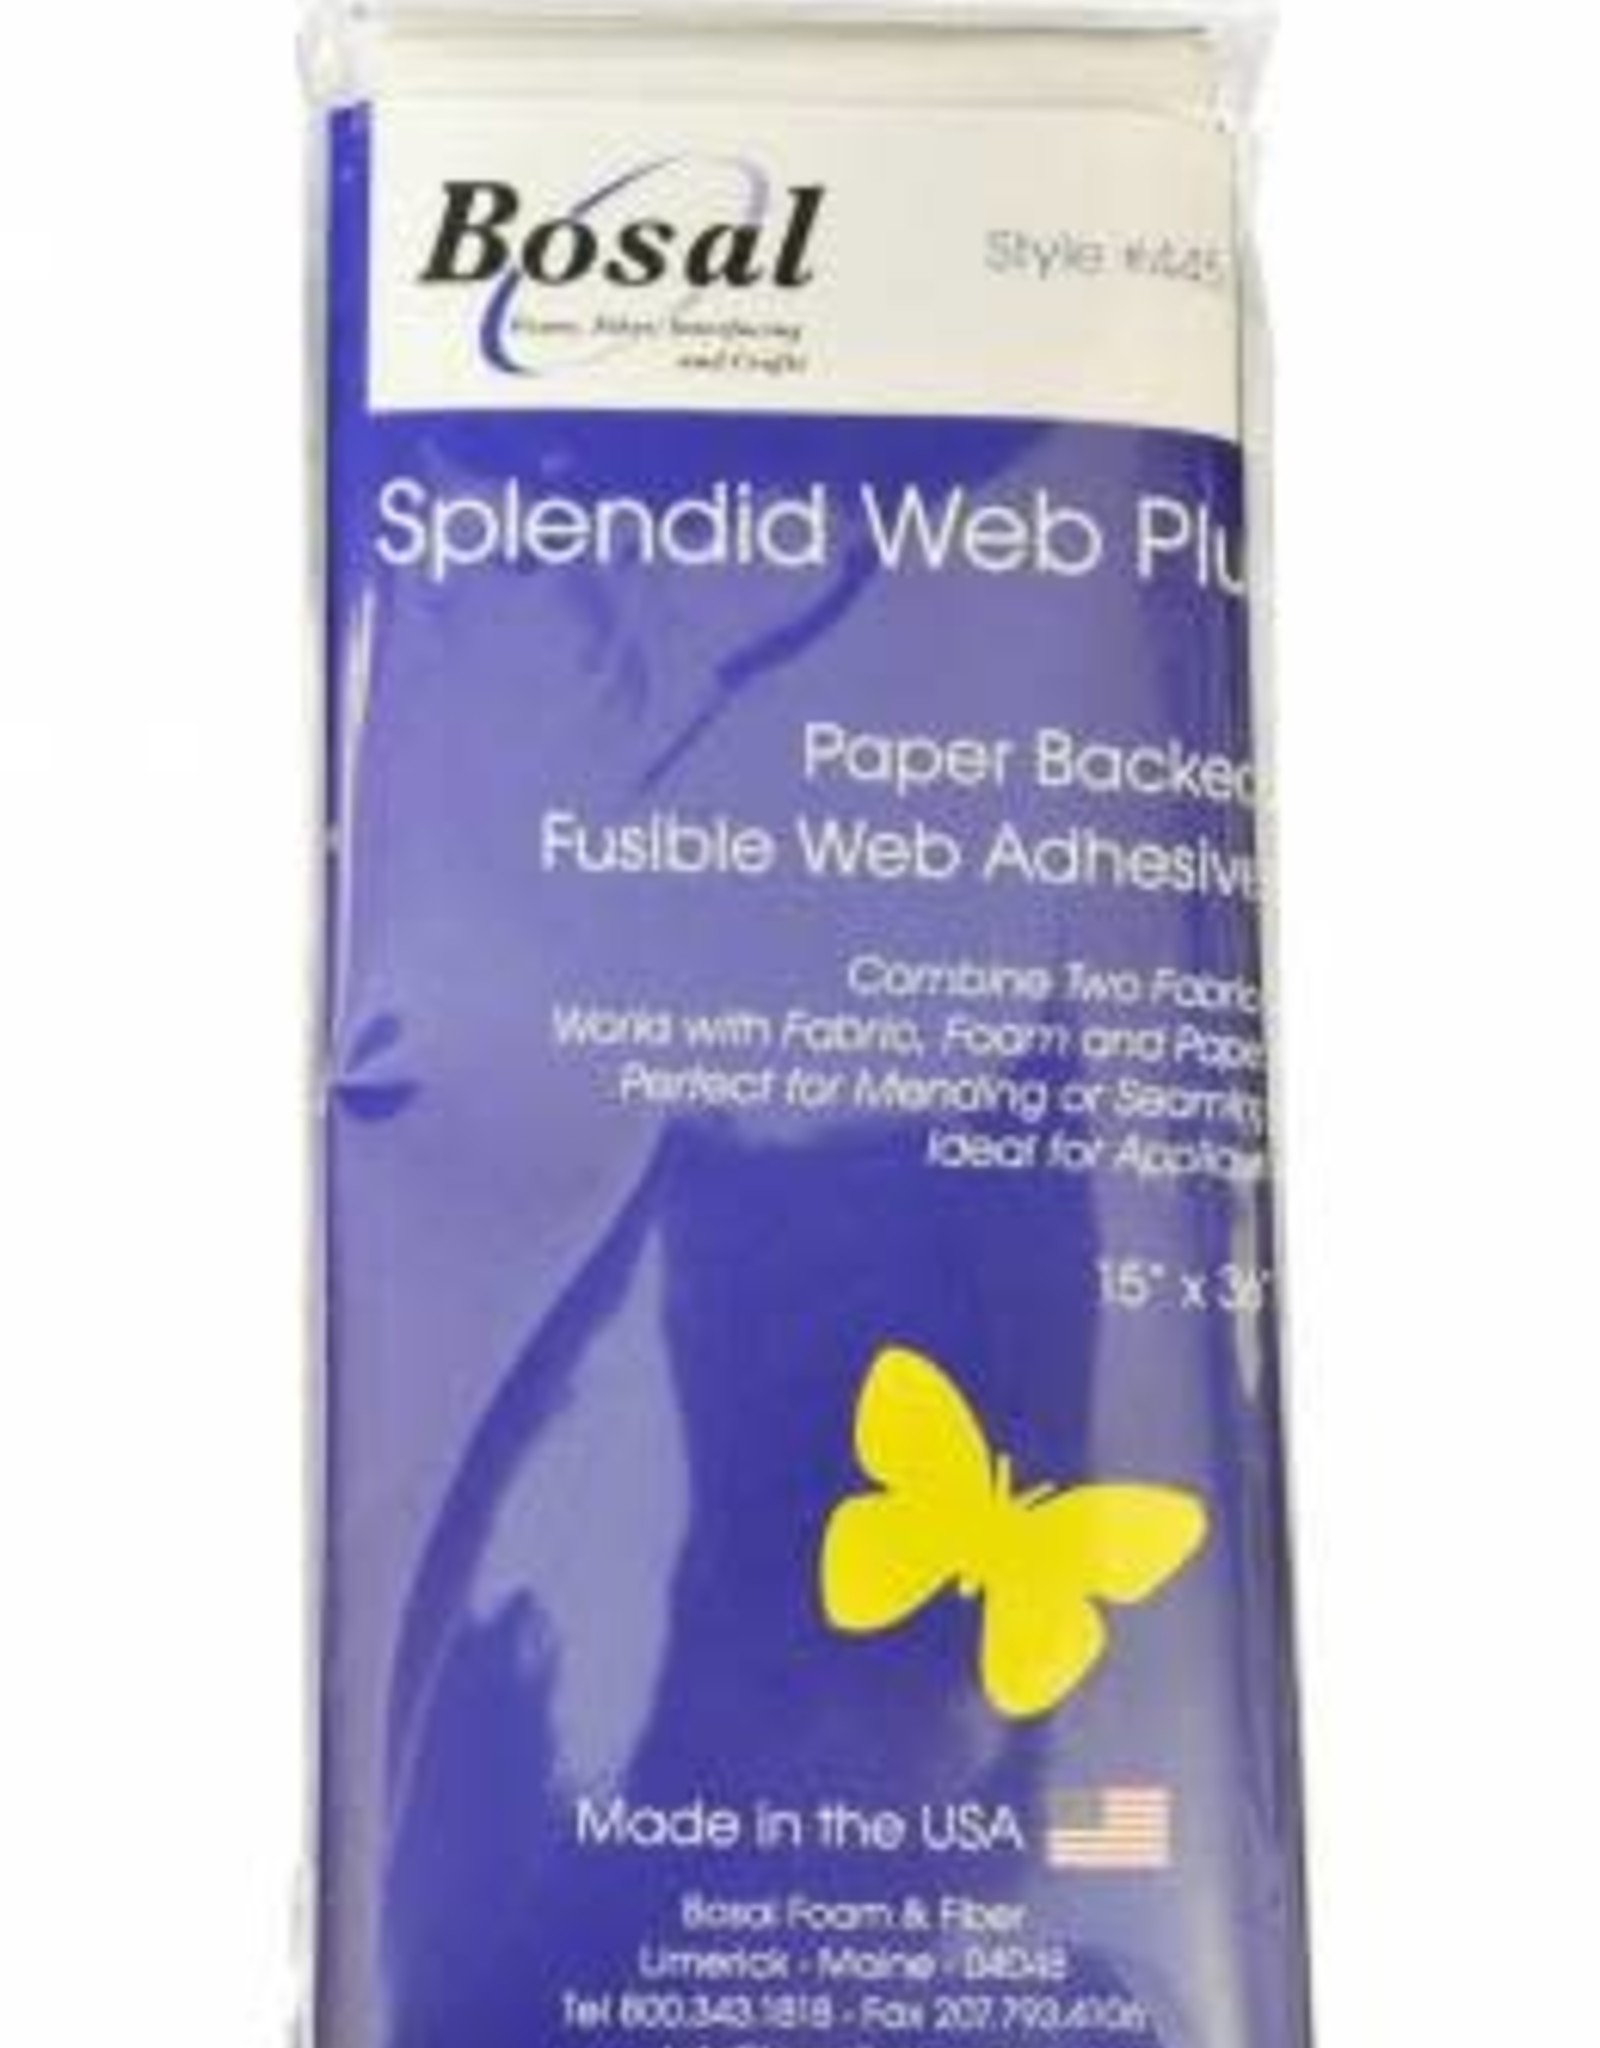 Splendid Web Plus Paper Backed Fusible Web Adhesive 15in x 36in